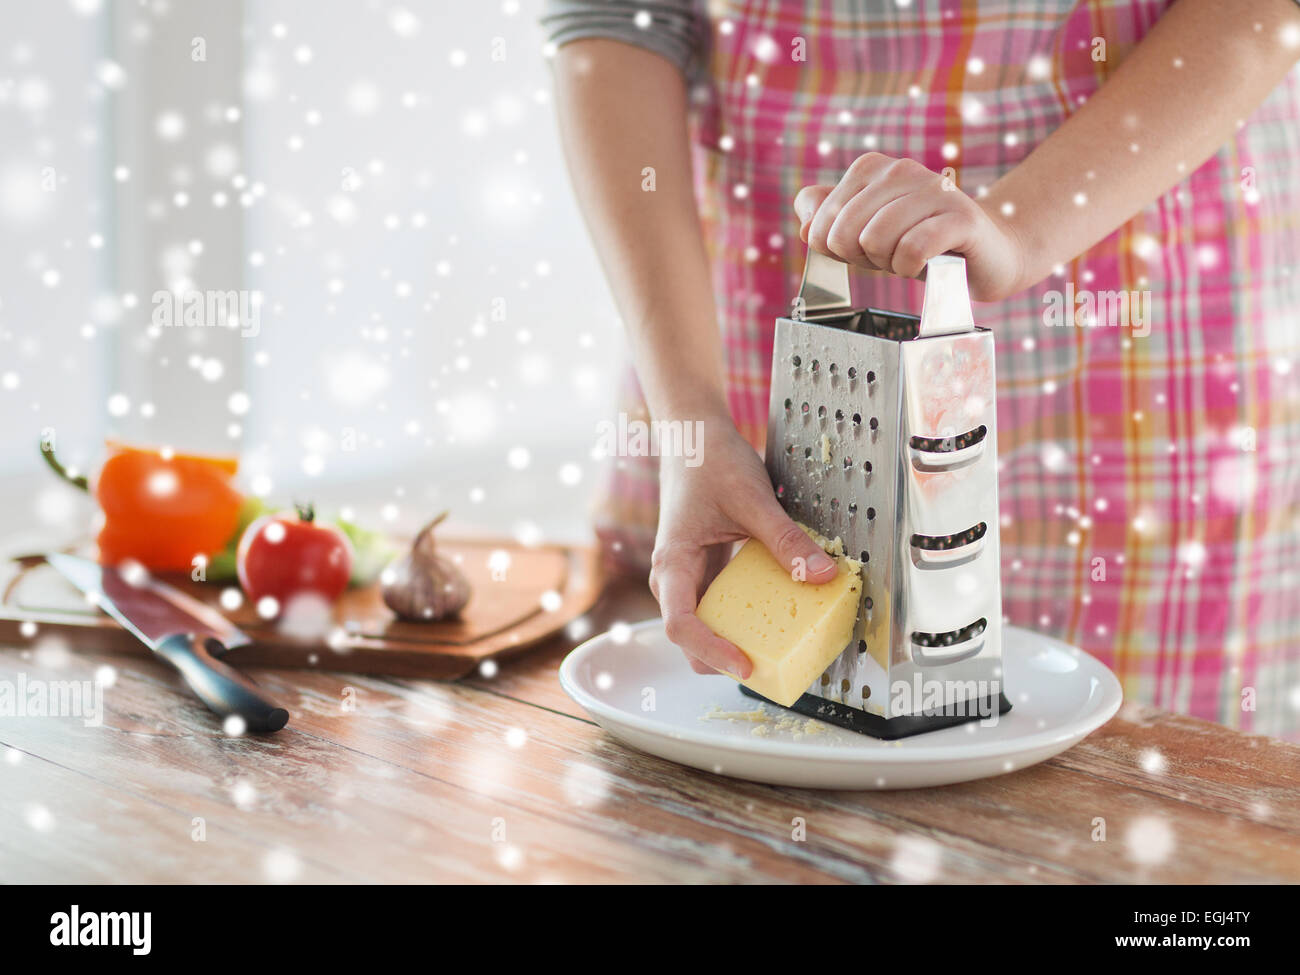 https://c8.alamy.com/comp/EGJ4TY/close-up-of-woman-hands-with-grater-grating-cheese-EGJ4TY.jpg